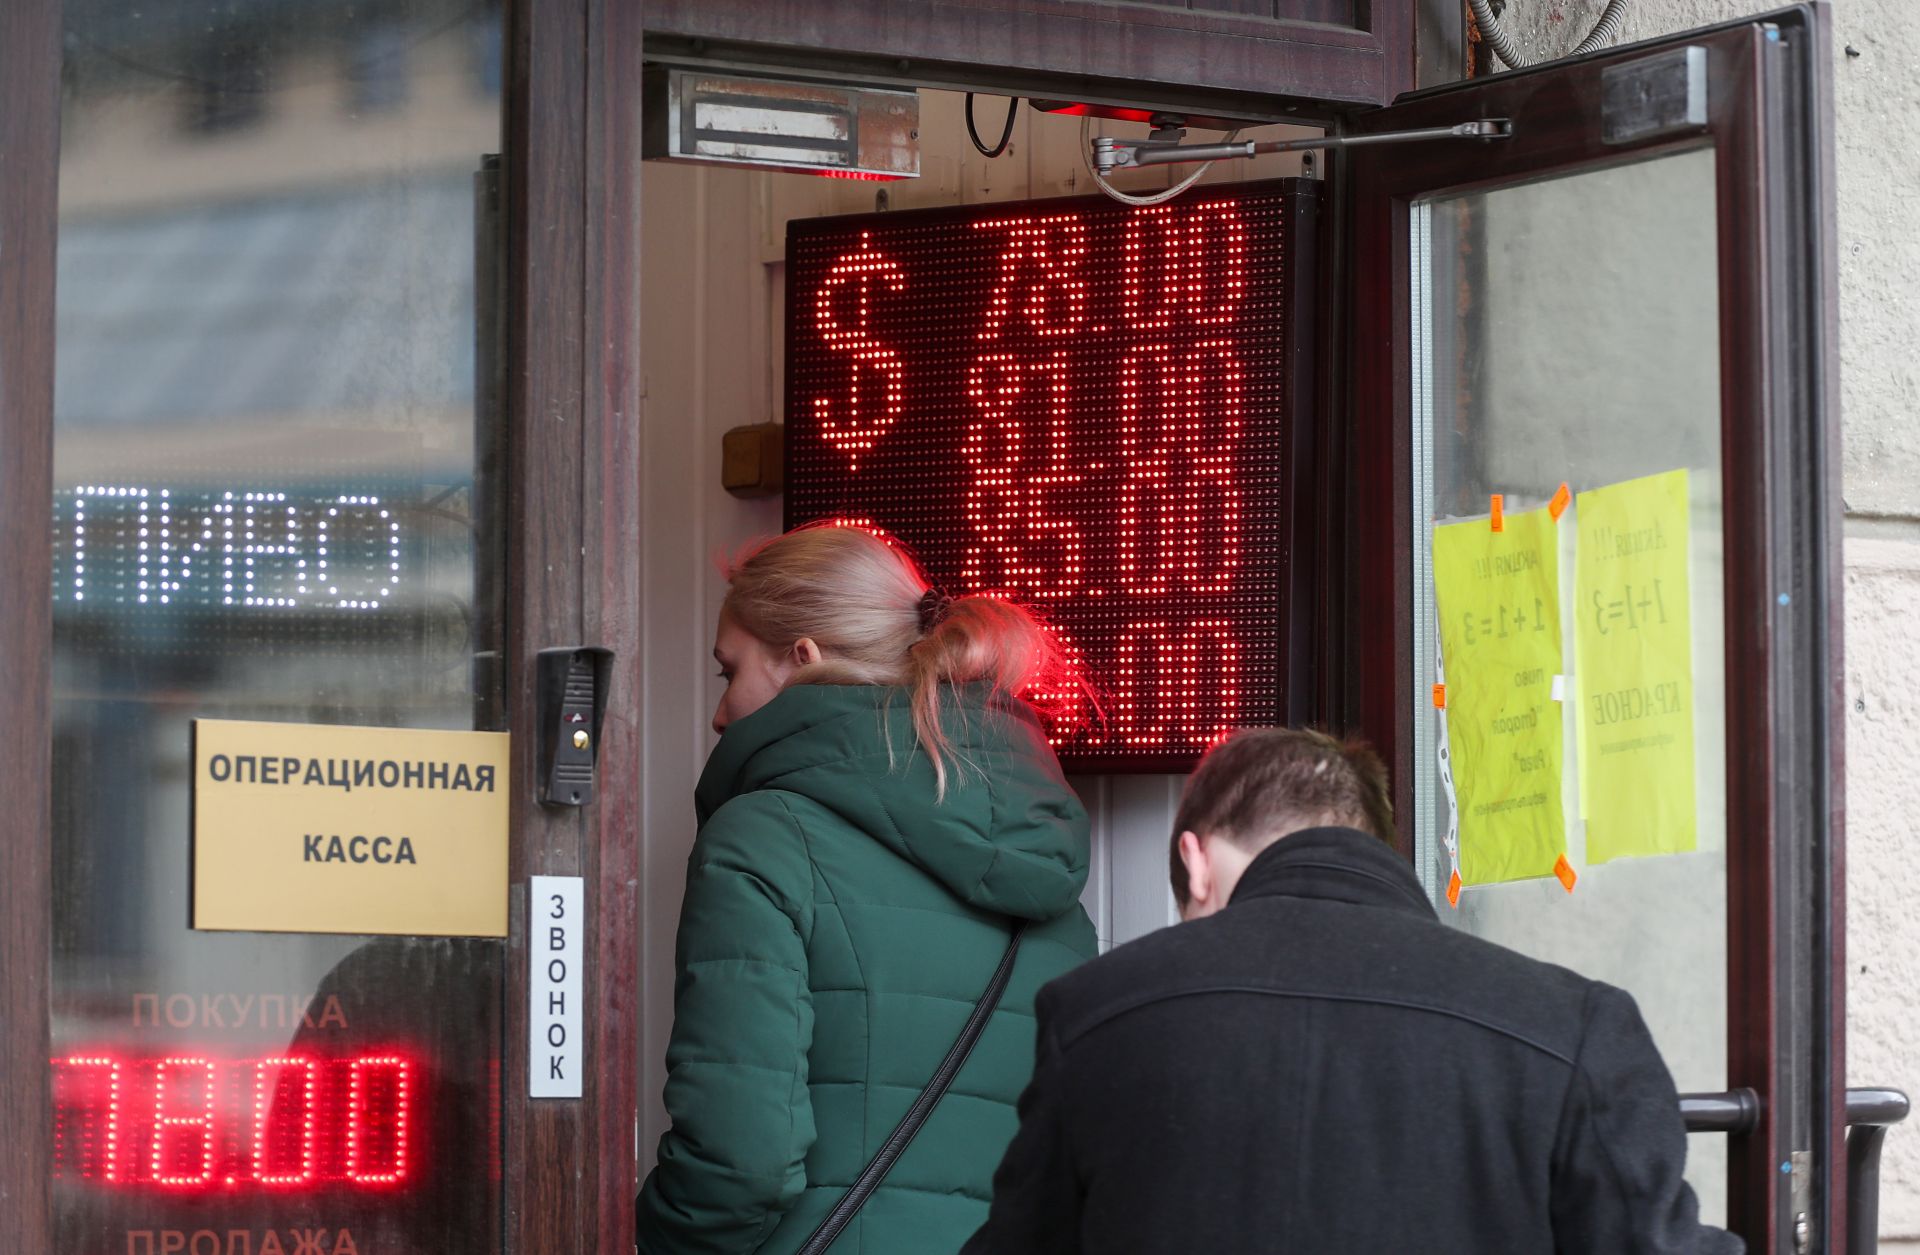 A digital board displaying currency exchange rates in Moscow on March 18, 2020.